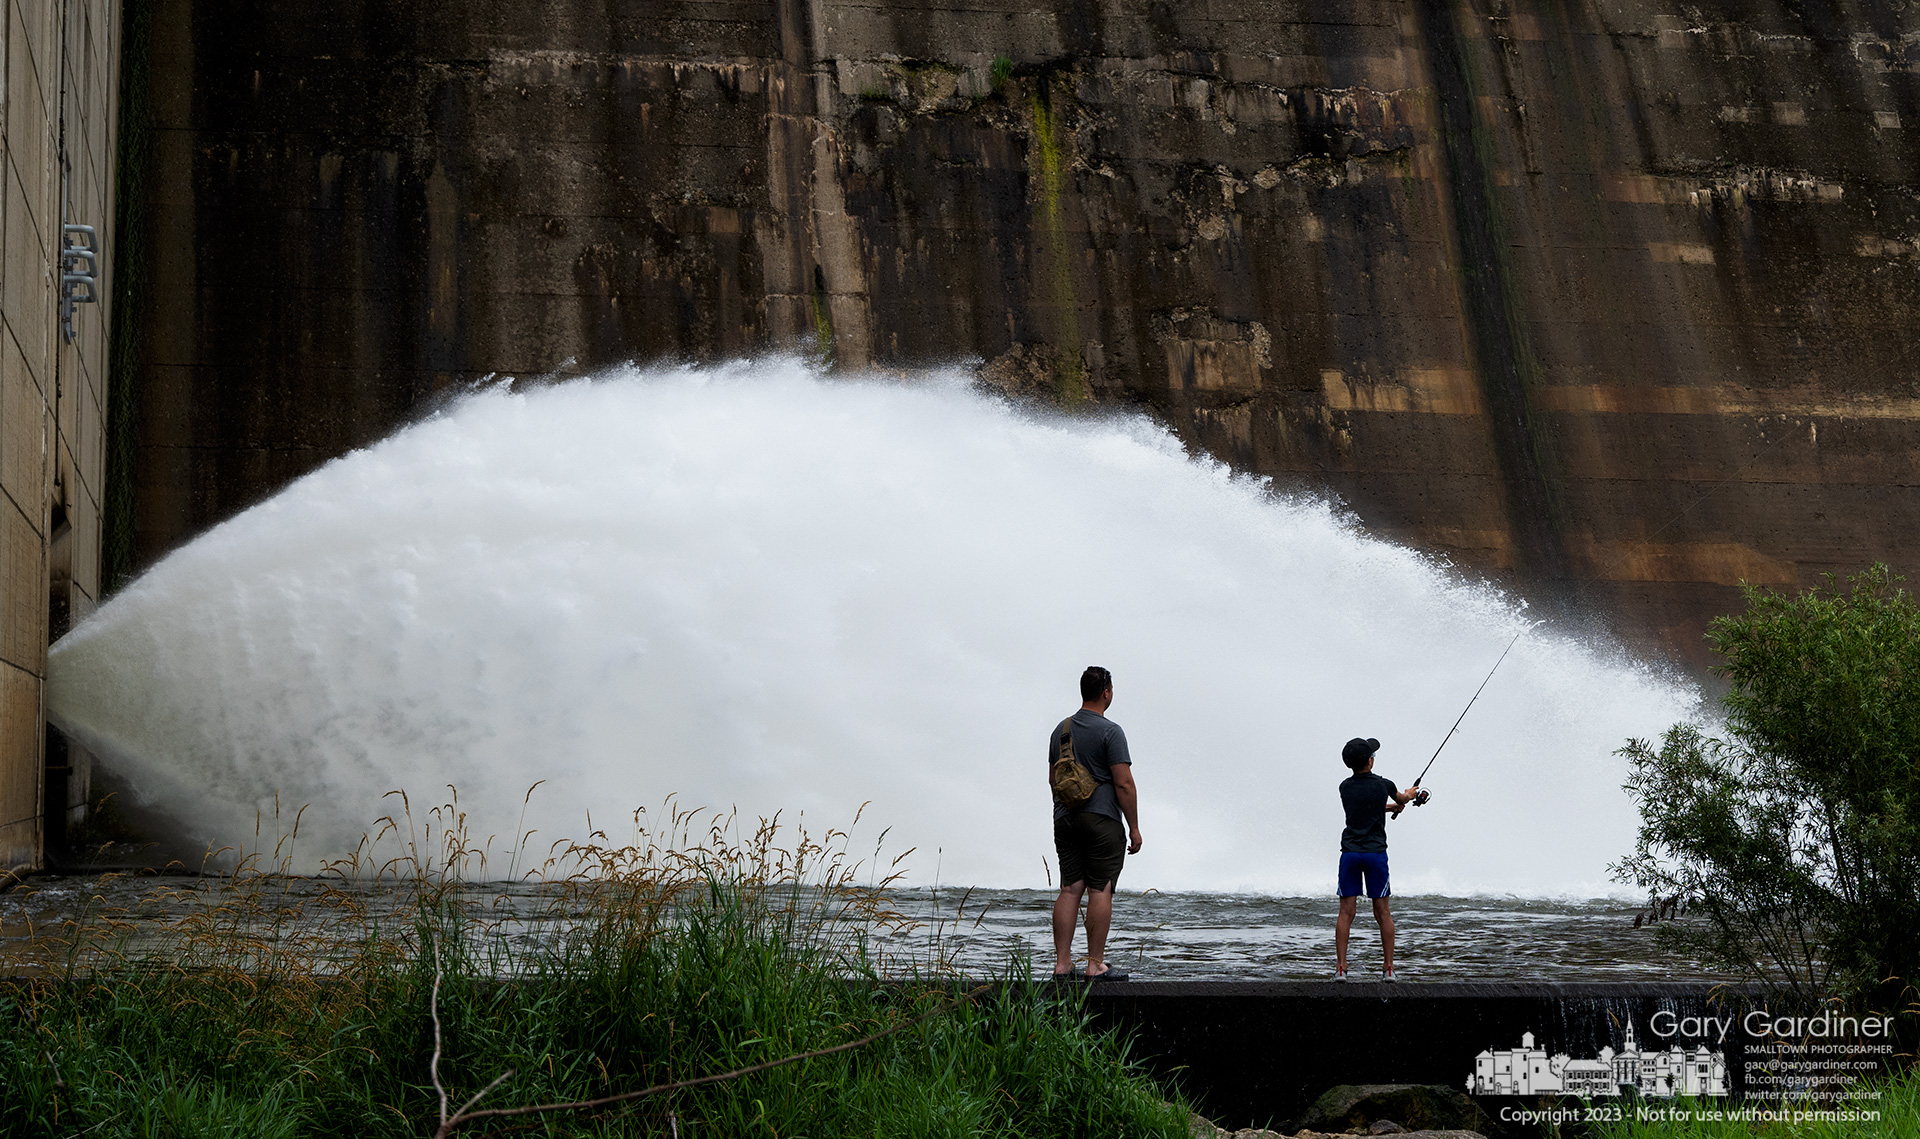 Father and son stand on the retaining wall below the Hoover Reservoir dam spillway hoping they've chosen both the proper lure and the right spot for fishing. My Final Photo for July 3, 2023.